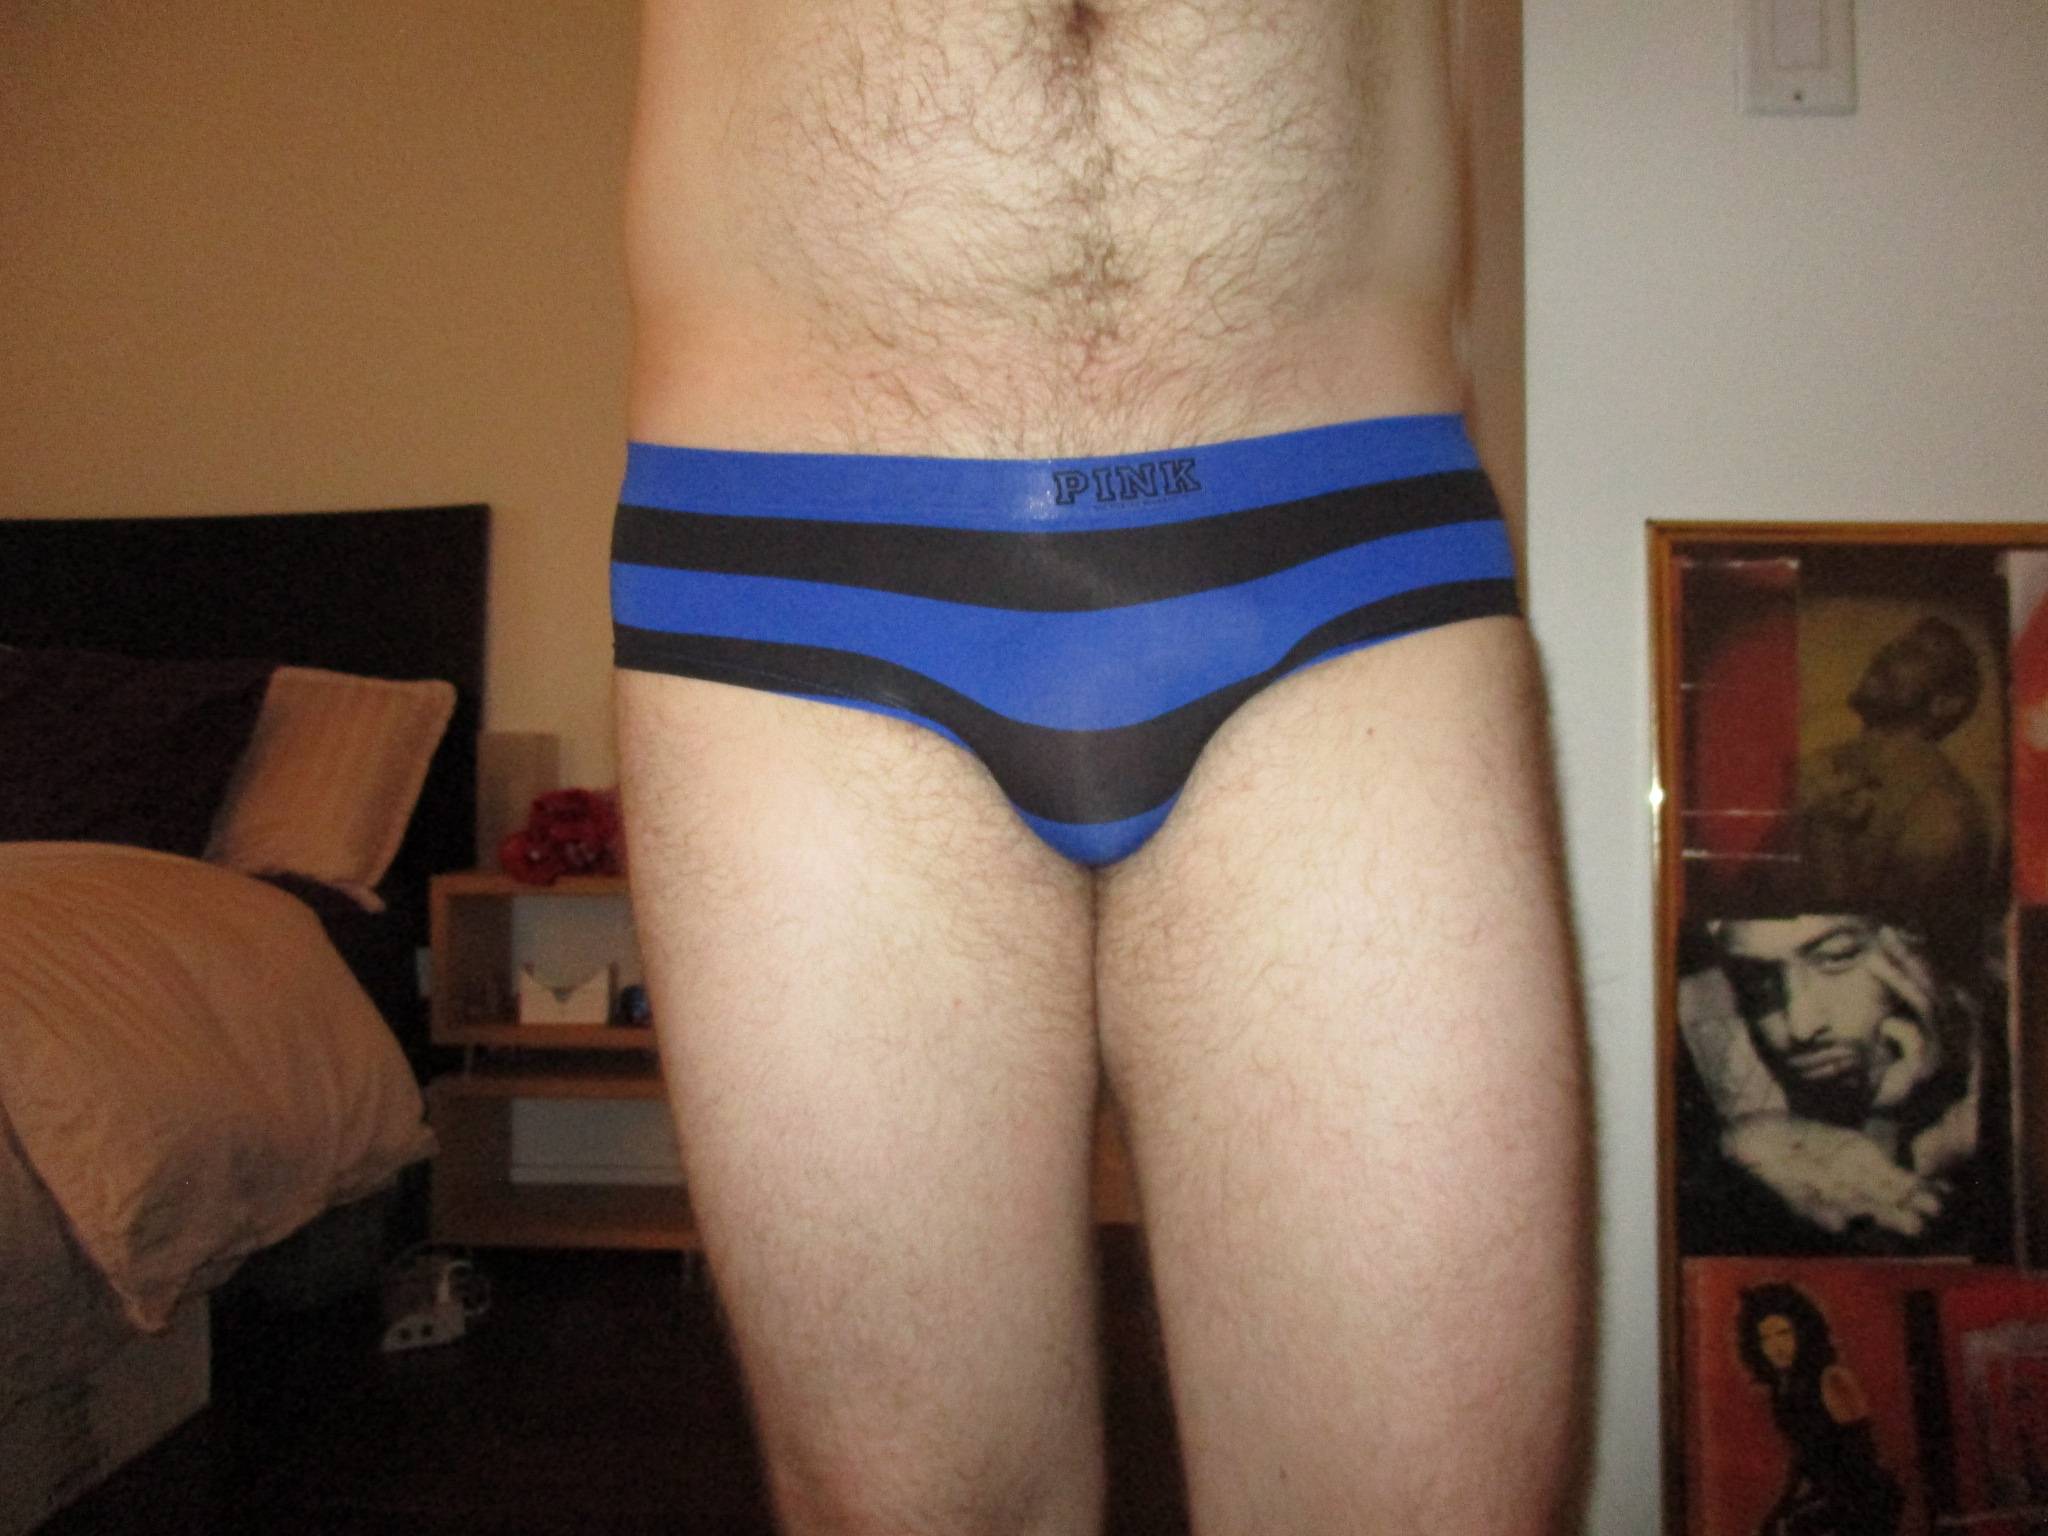 Request for me to wear specific undies…